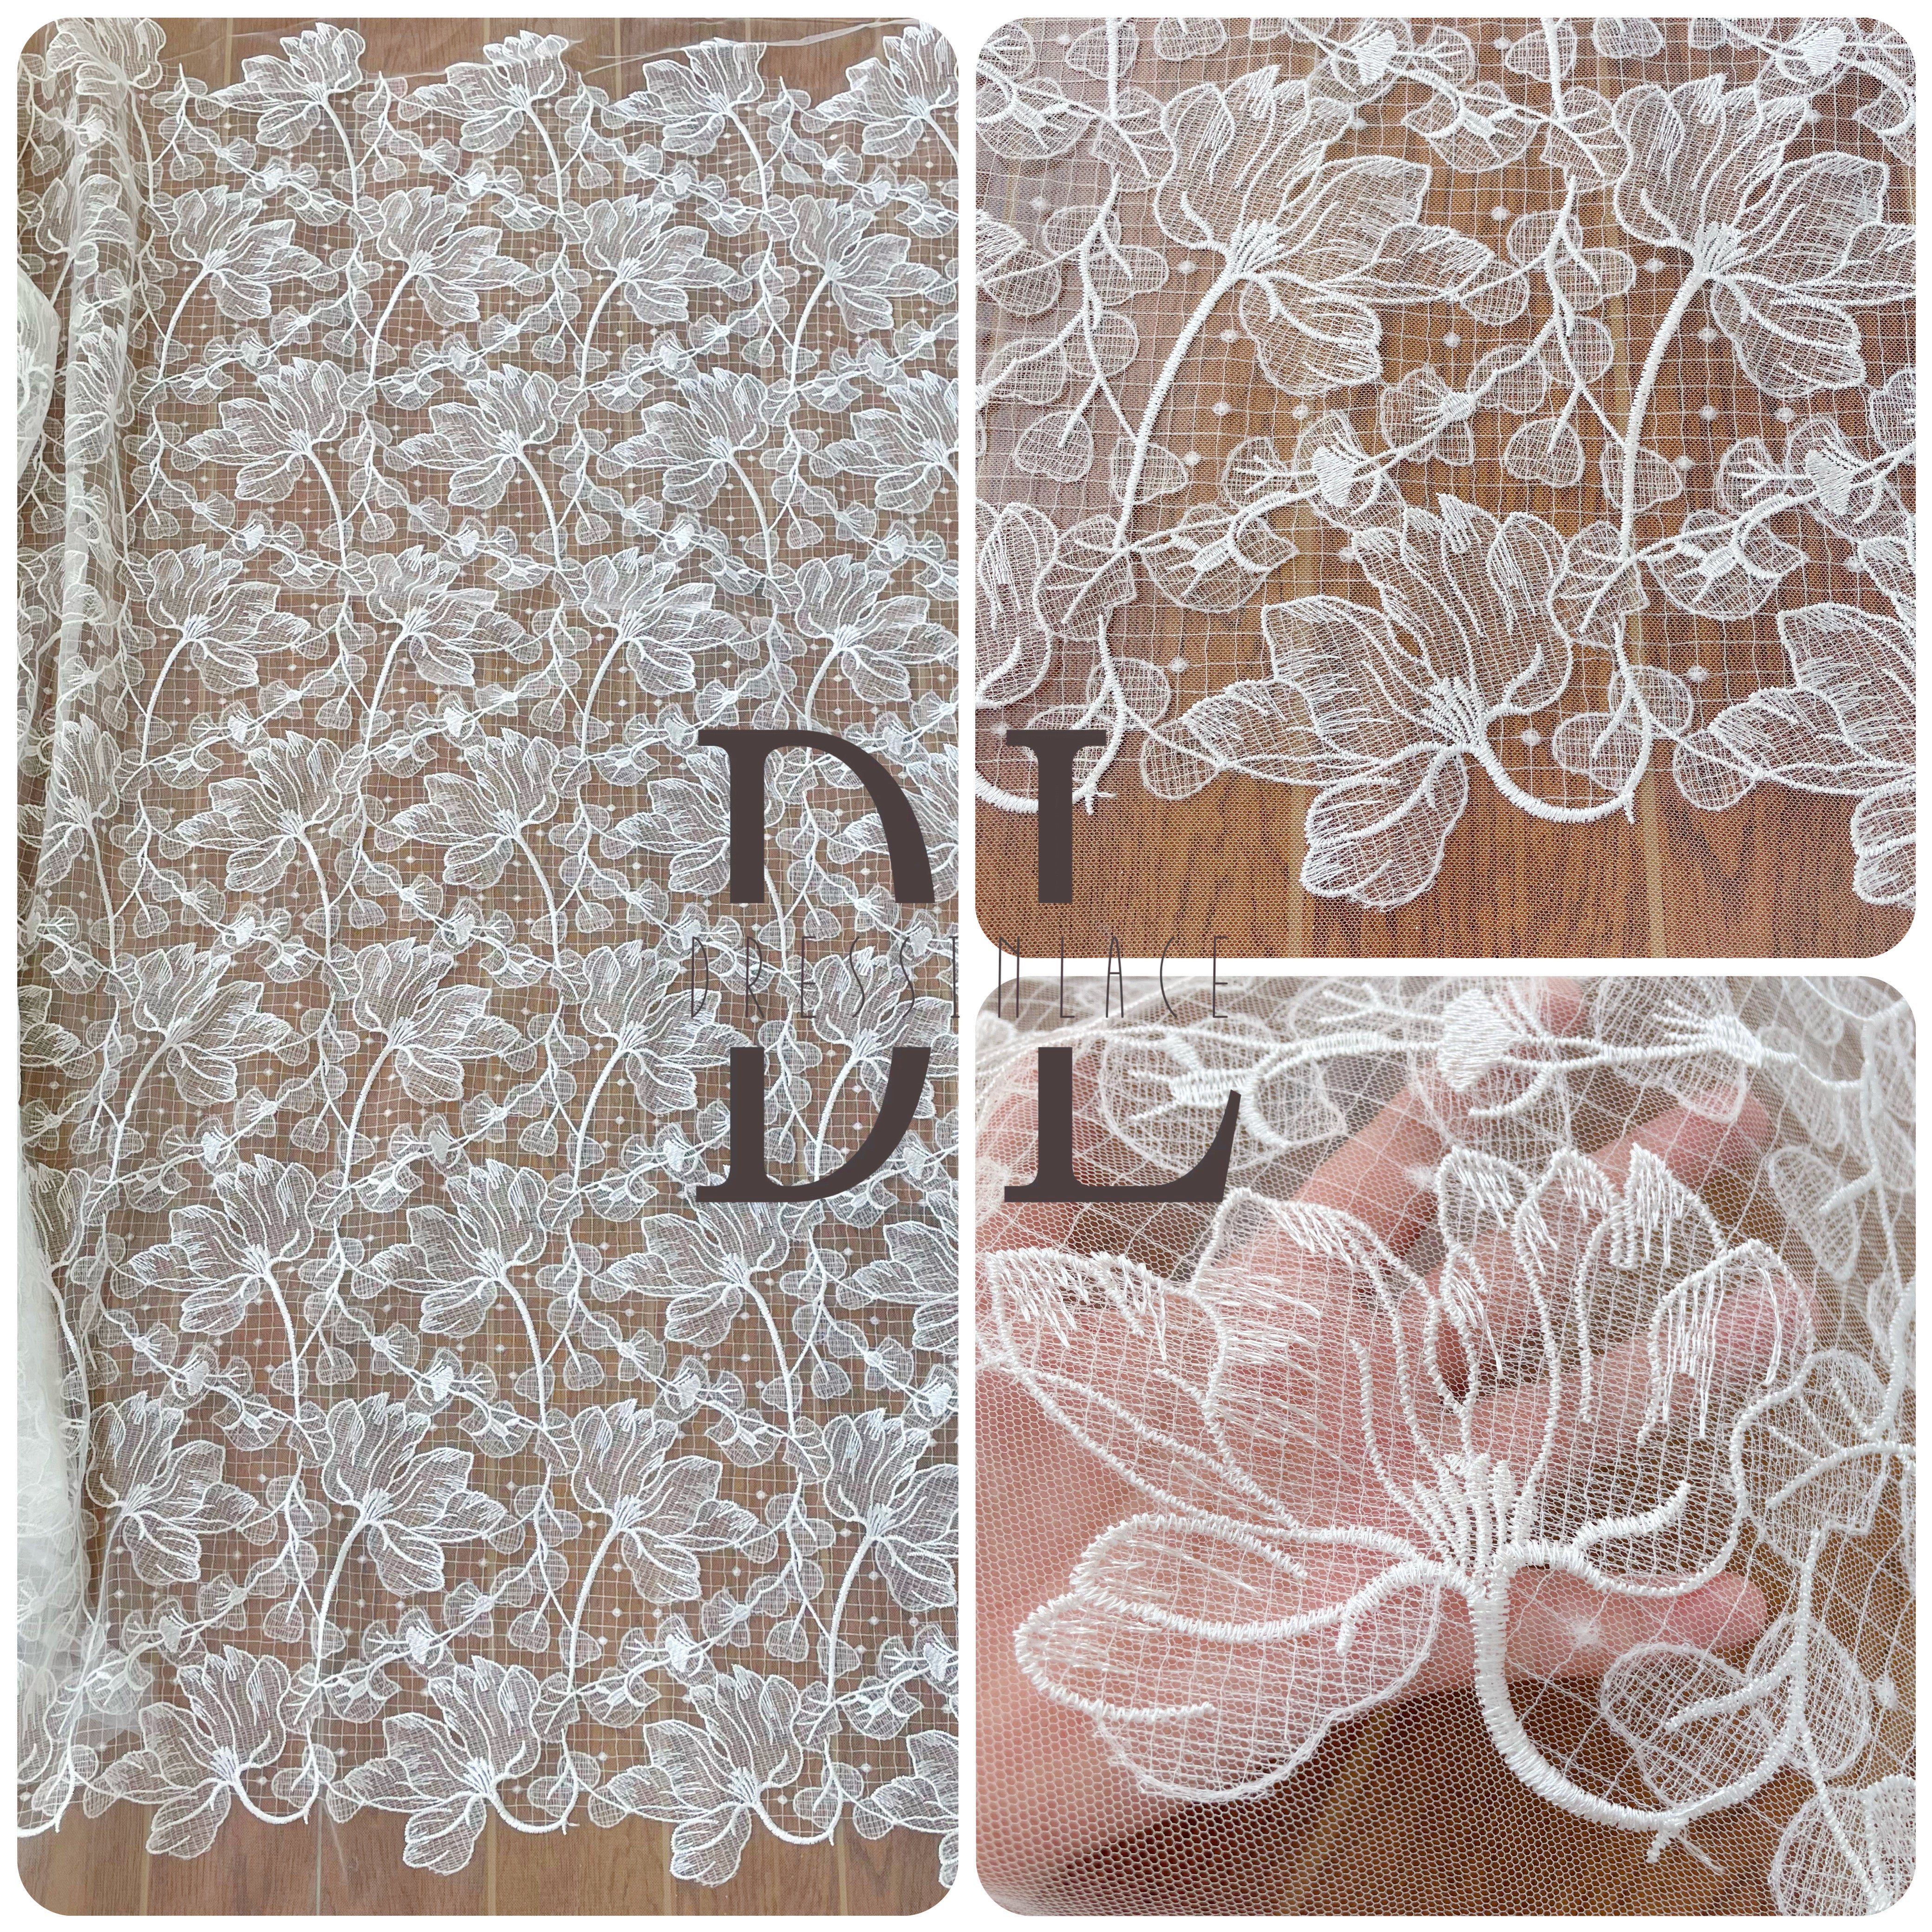 DL120124 Elegant Lace Fabric - Water Soluble, Showcasing Beauty - Must-Have for a Sophisticated Look DL120124